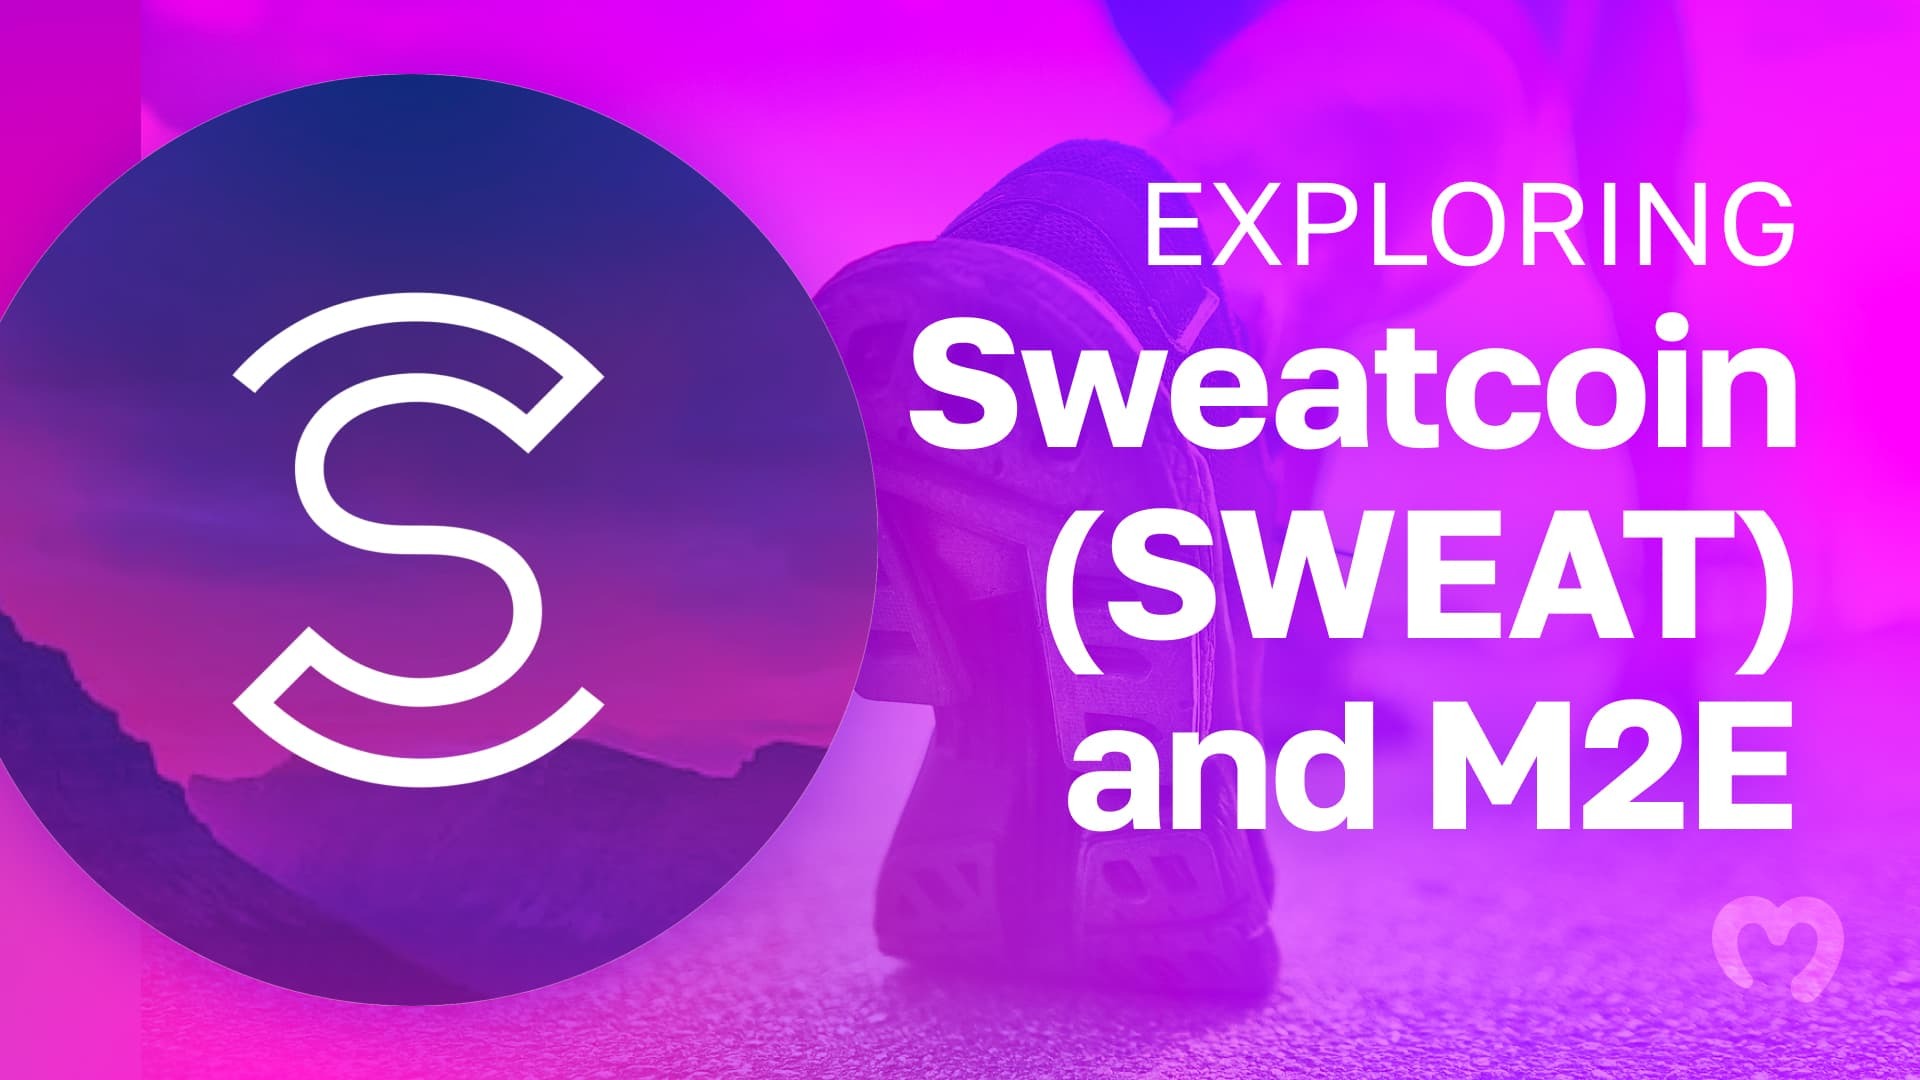 22_10_Exploriong-Sweatcoin-(SWEAT)-and-M2E